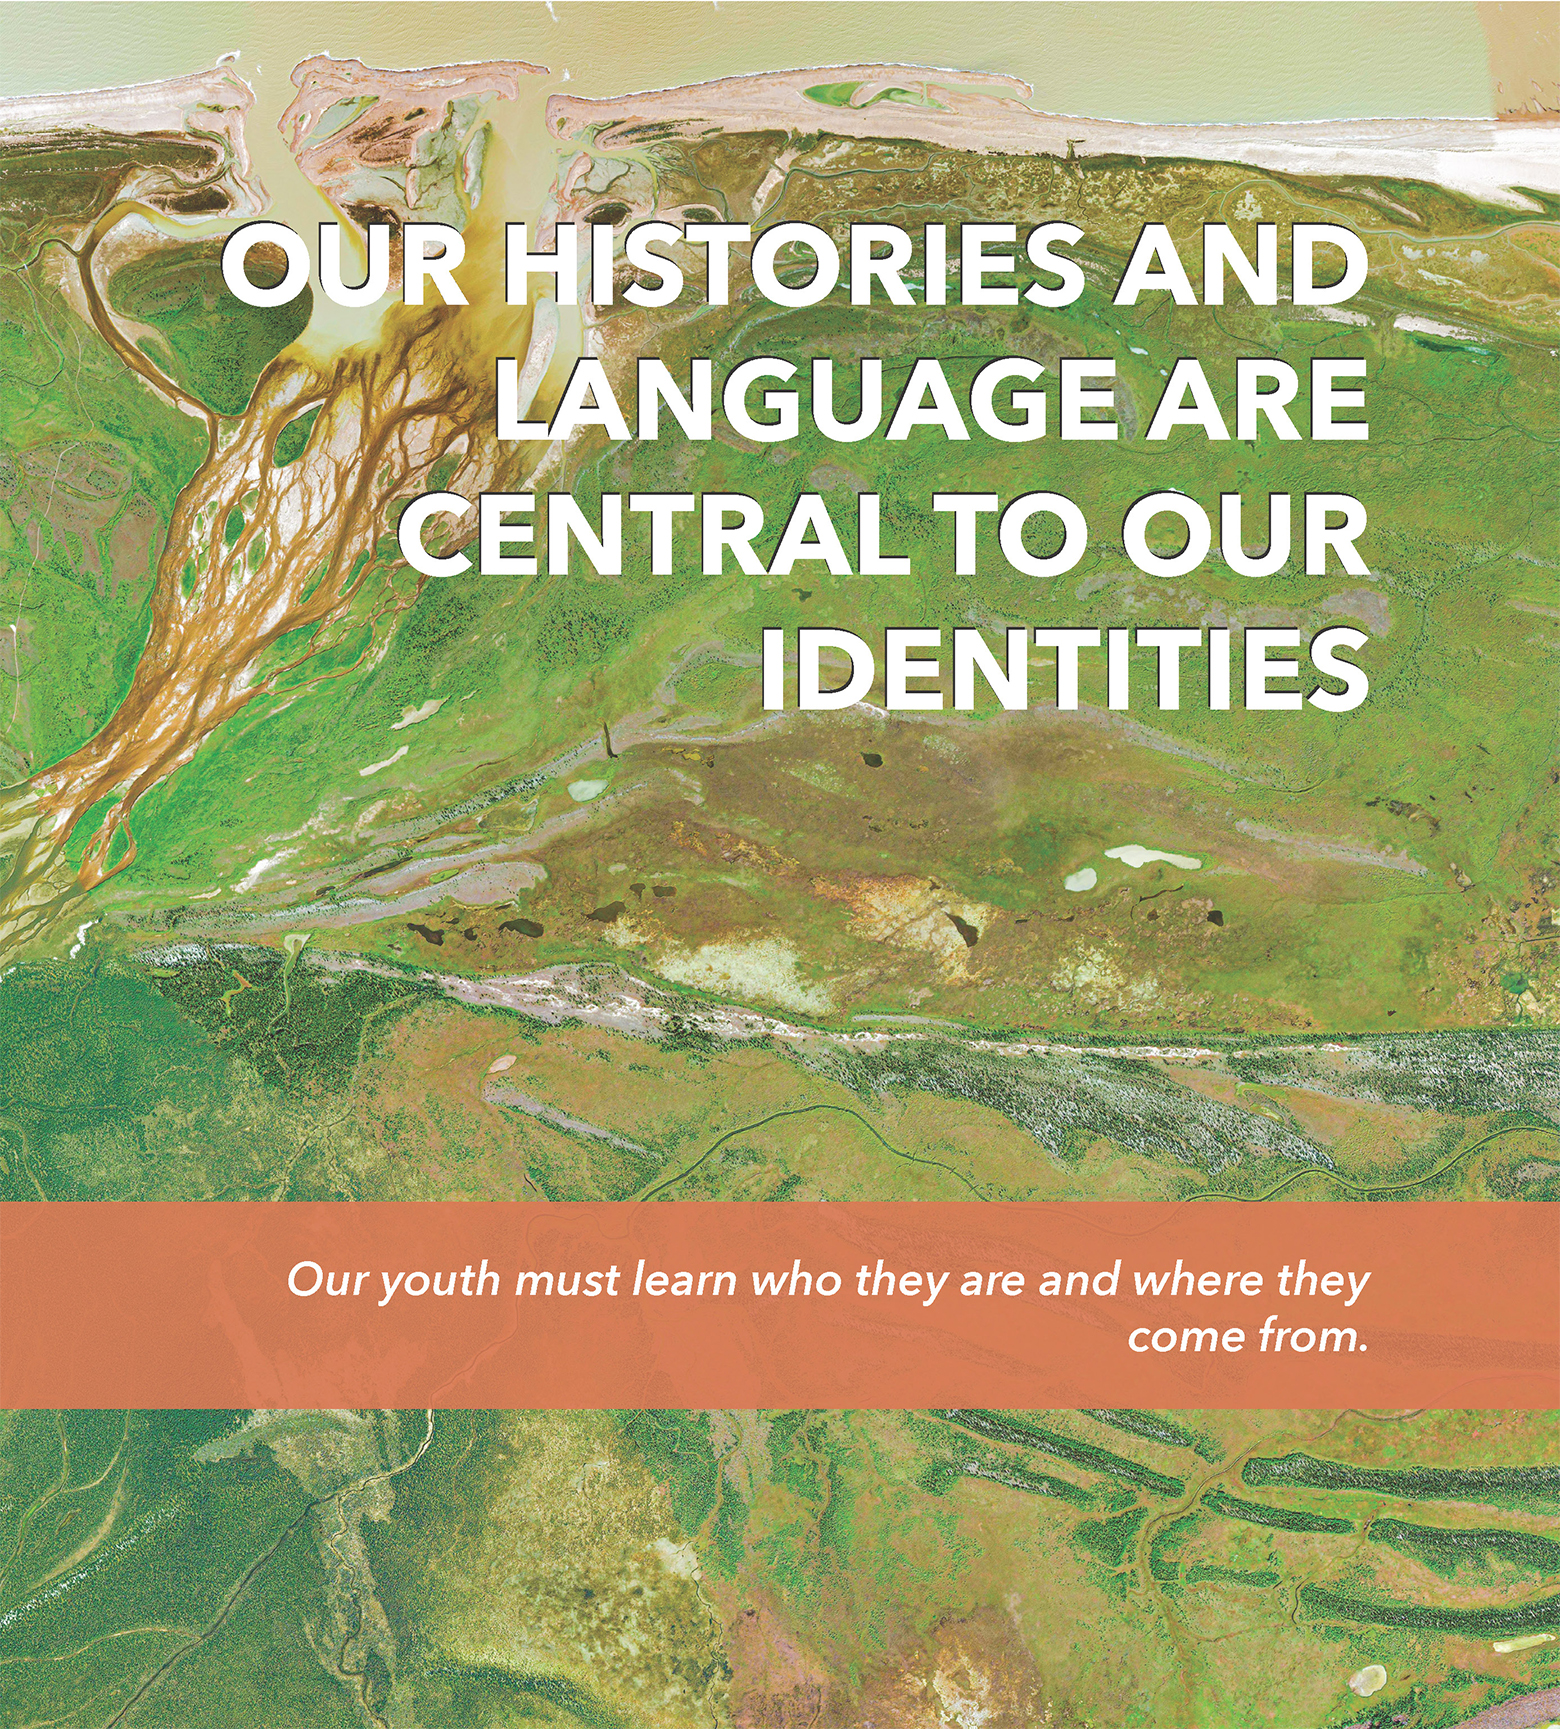 WE RECOGNIZE OUR ORIGINAL HISTORIES AND CREE LANGUAGE AS CENTRAL TO OUR IDENTITIES